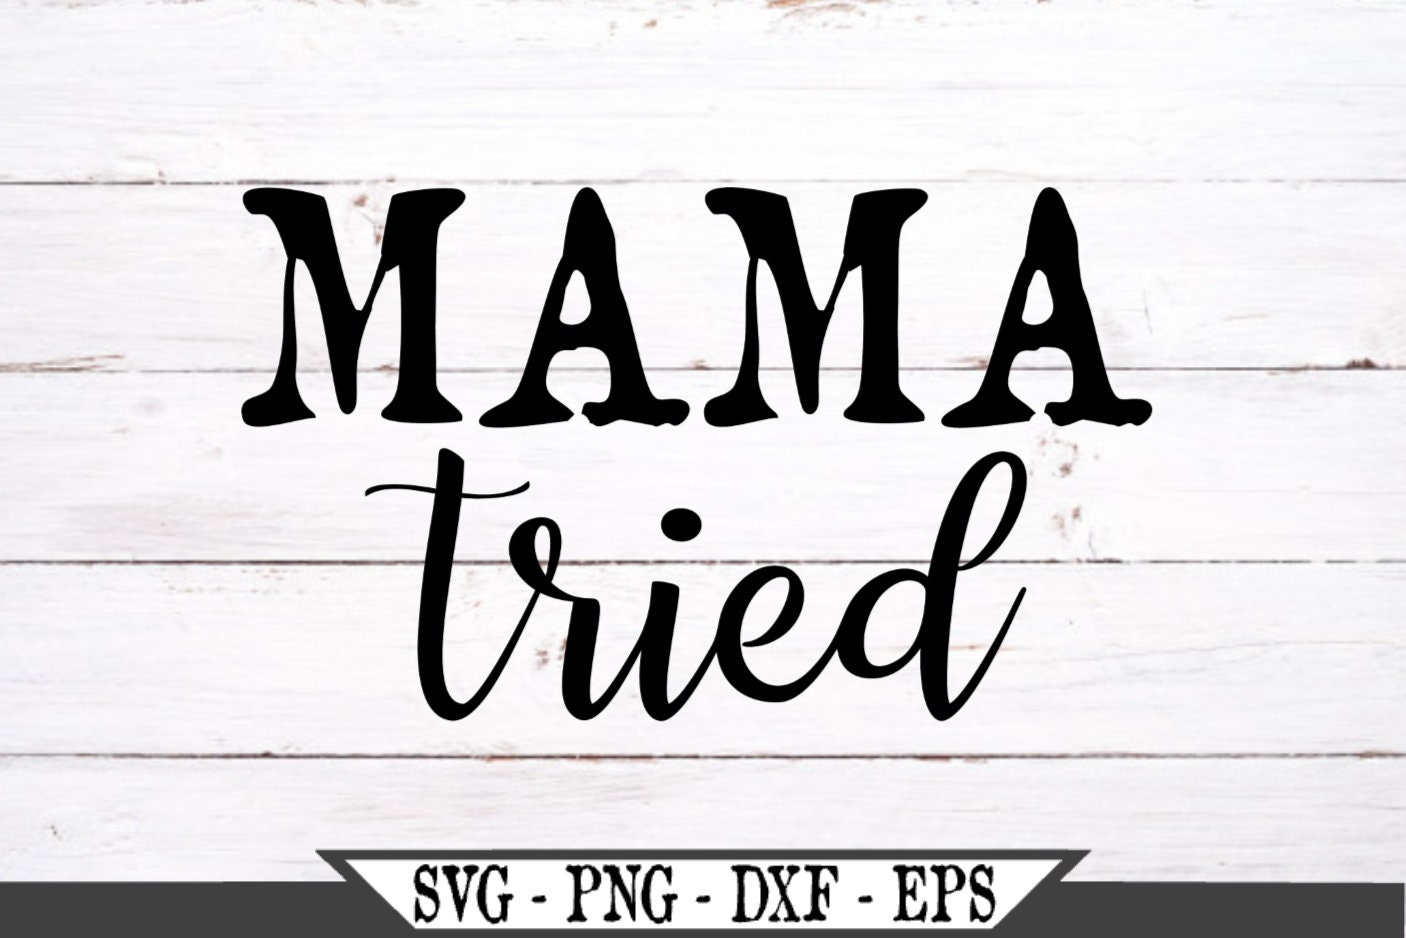 Mama Tried SVG Vinyl Cutter Cut File For Cricut Silhouette | Etsy